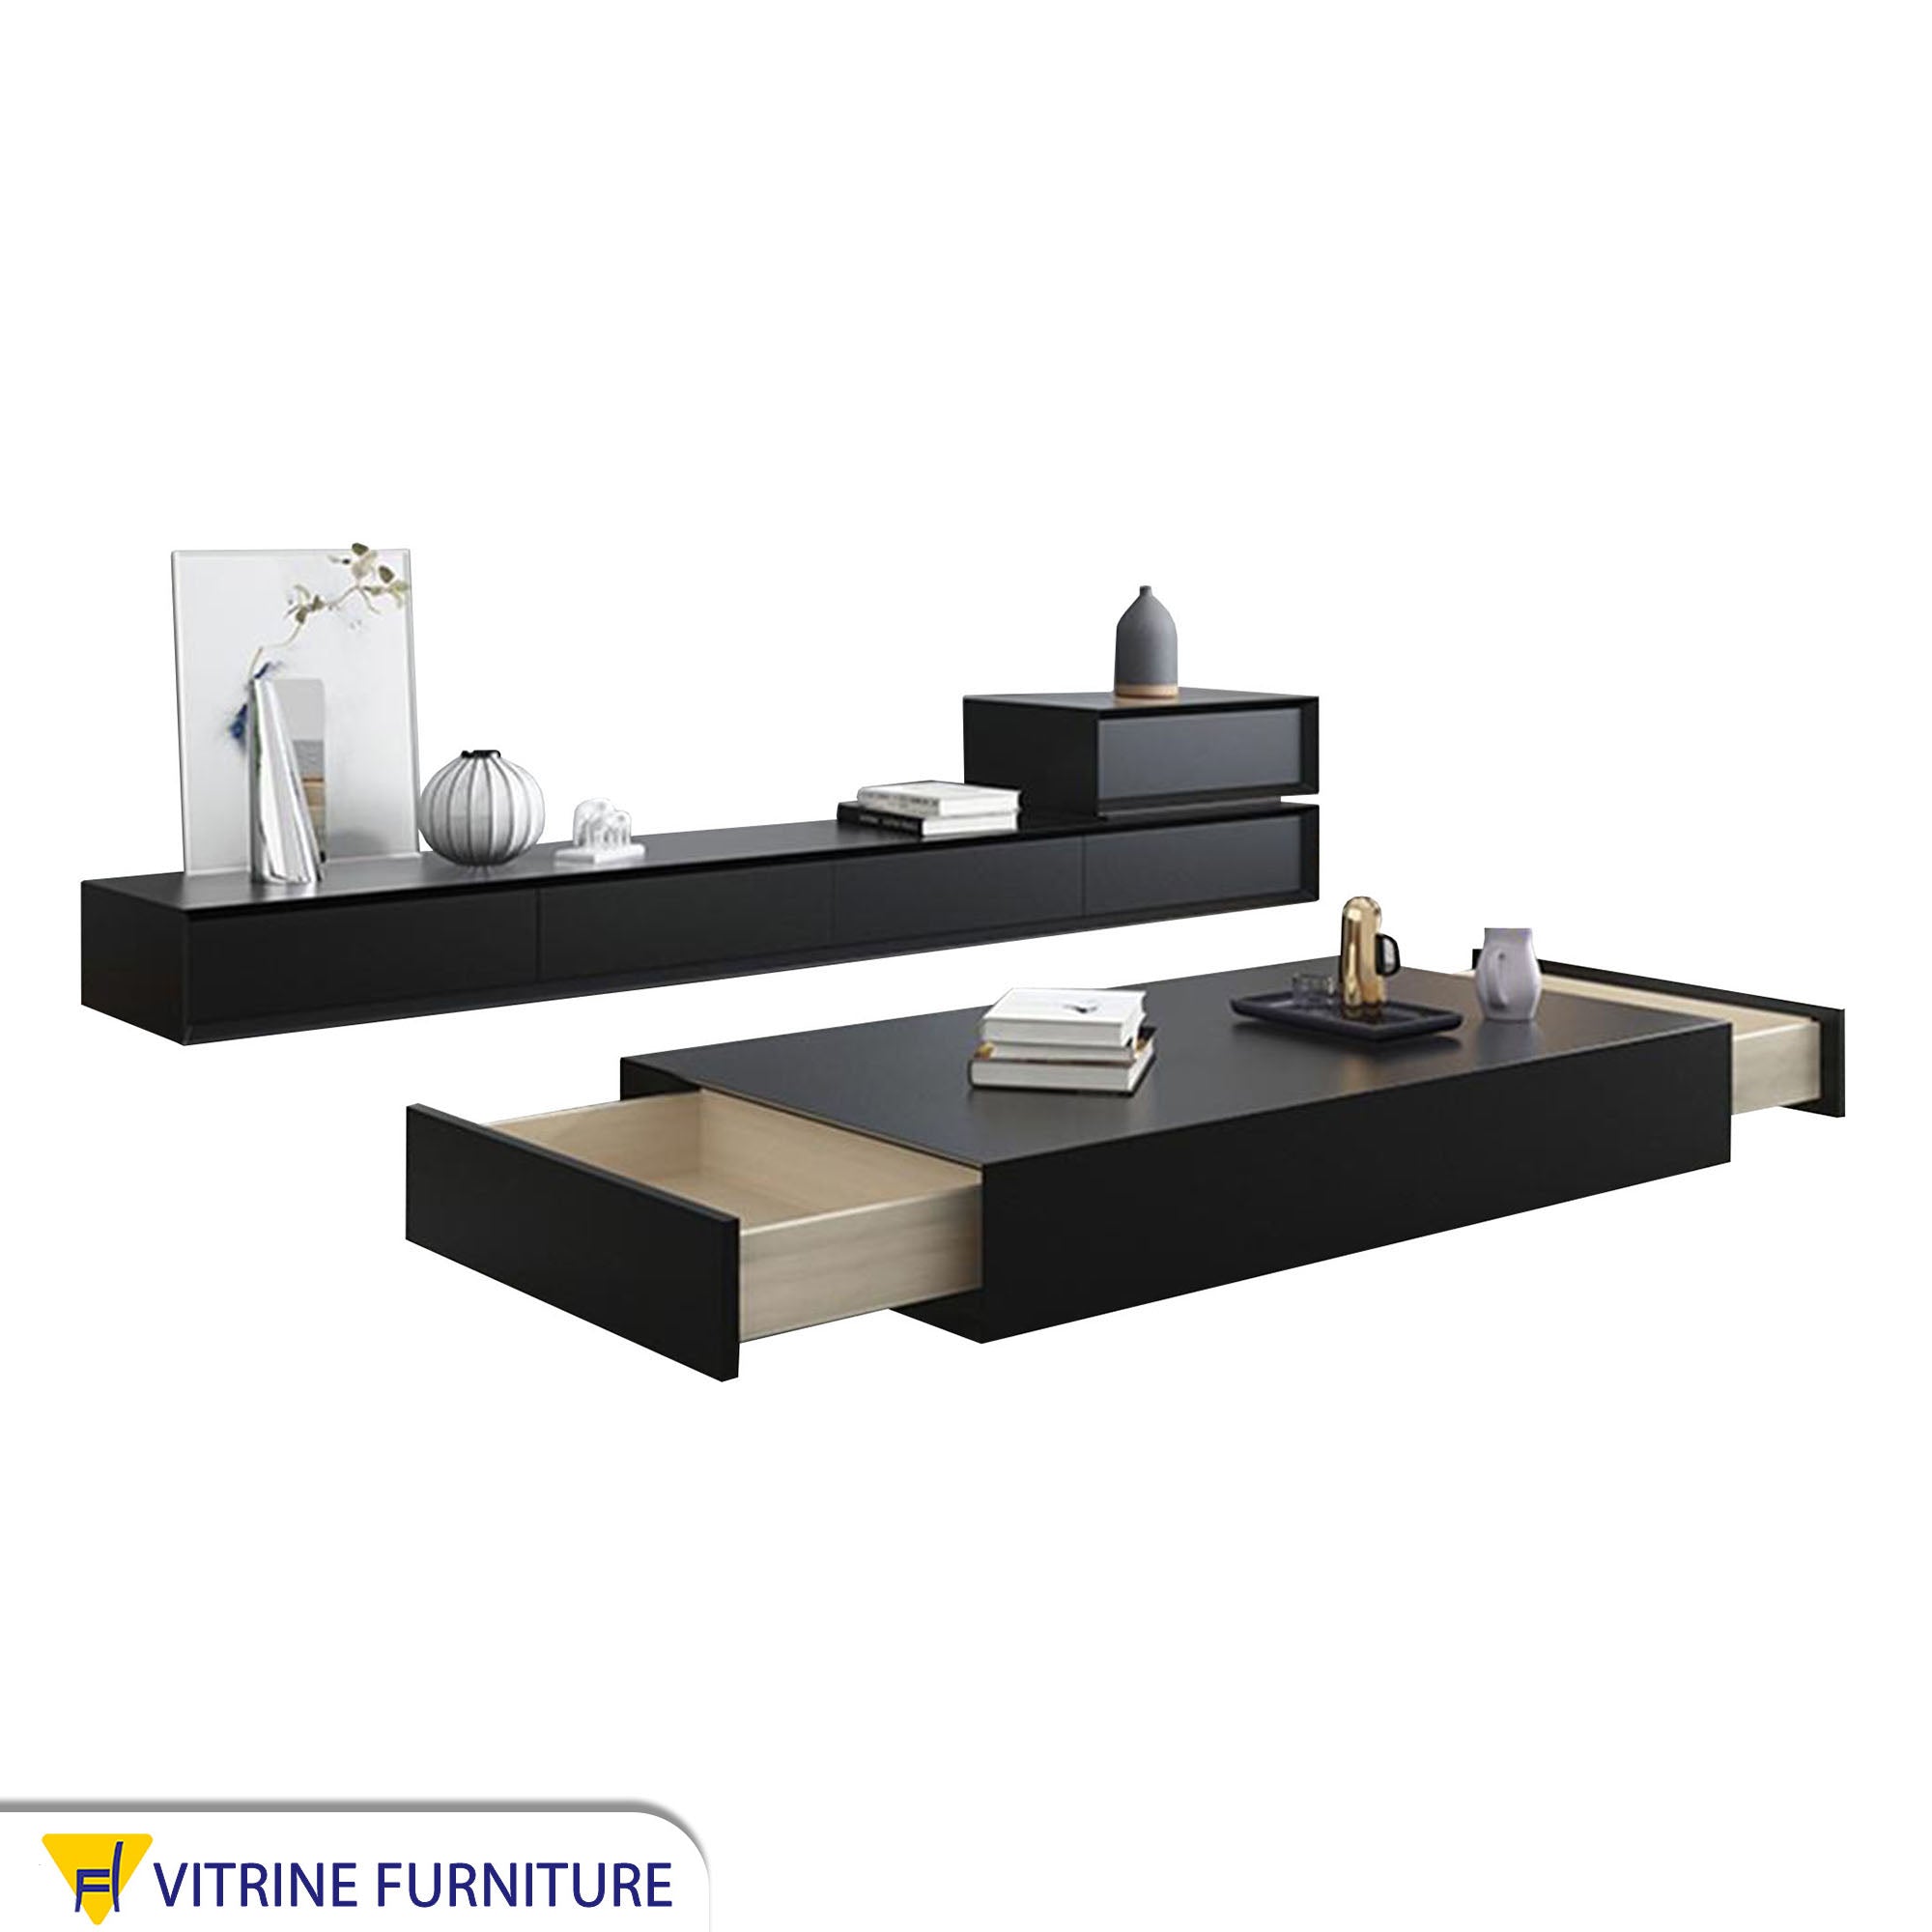 Modern TV unit and black table